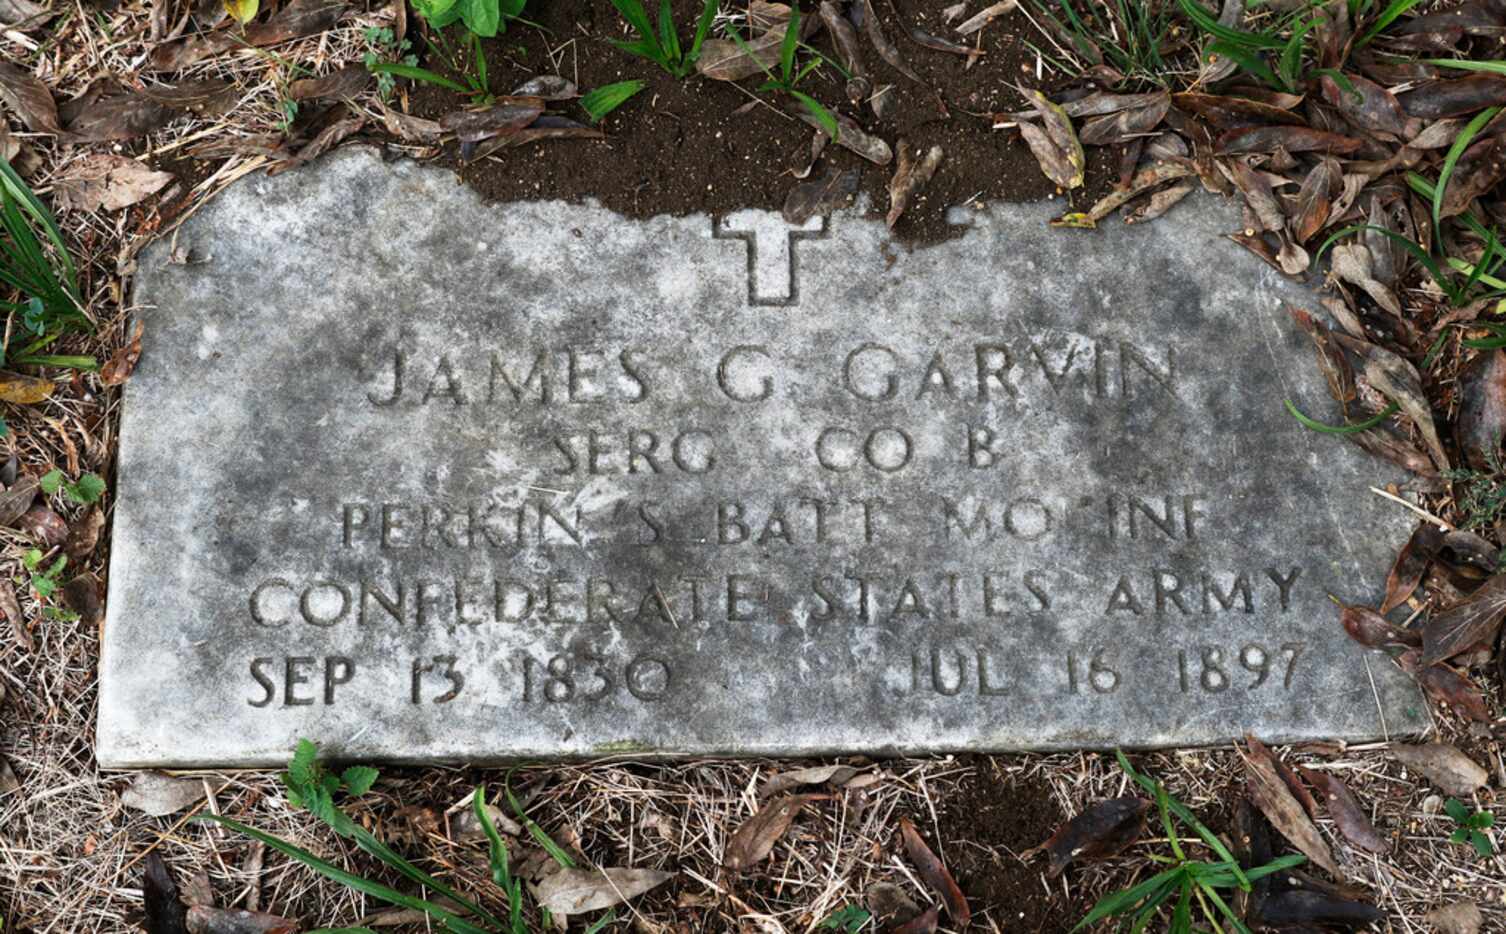 James Garvin, a Dallas grocer, deeded the land for his namesake cemetery off West Northwest...